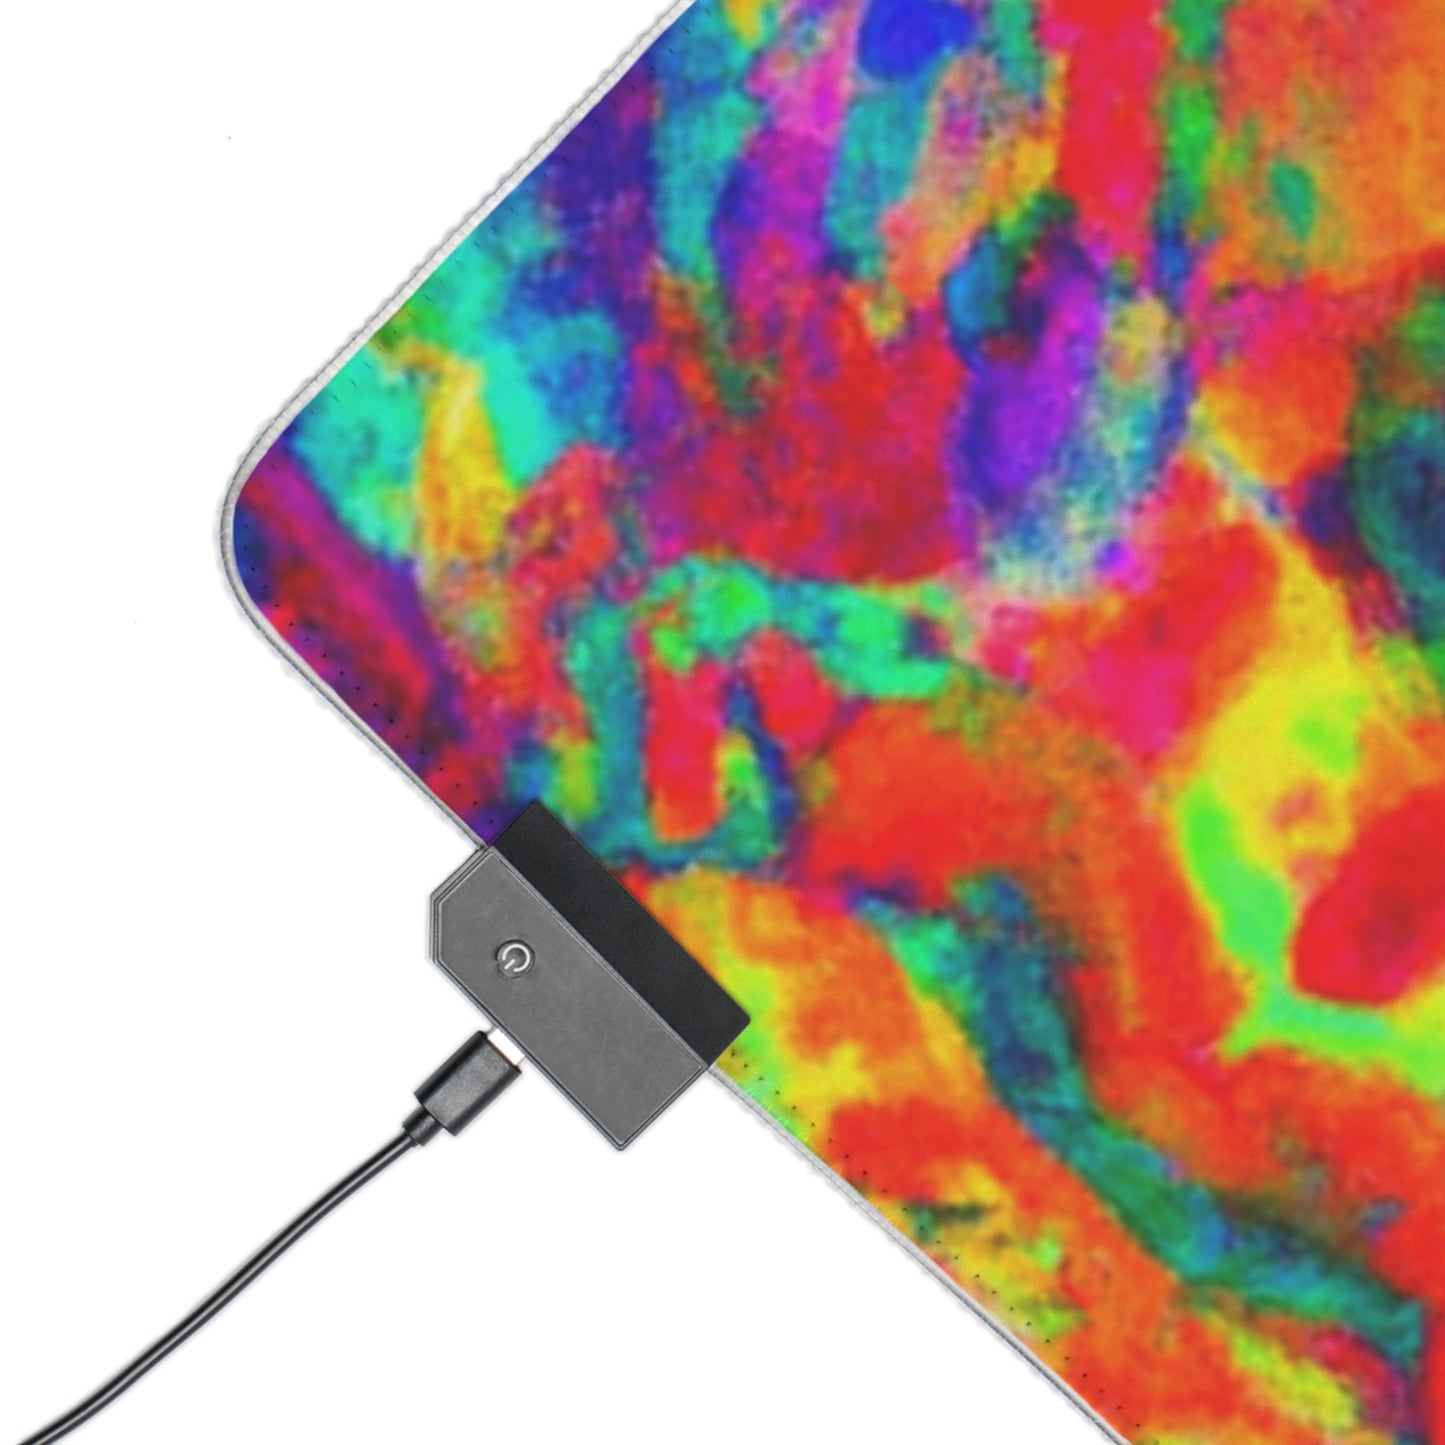 Alan Rocketblast - Psychedelic Trippy LED Light Up Gaming Mouse Pad